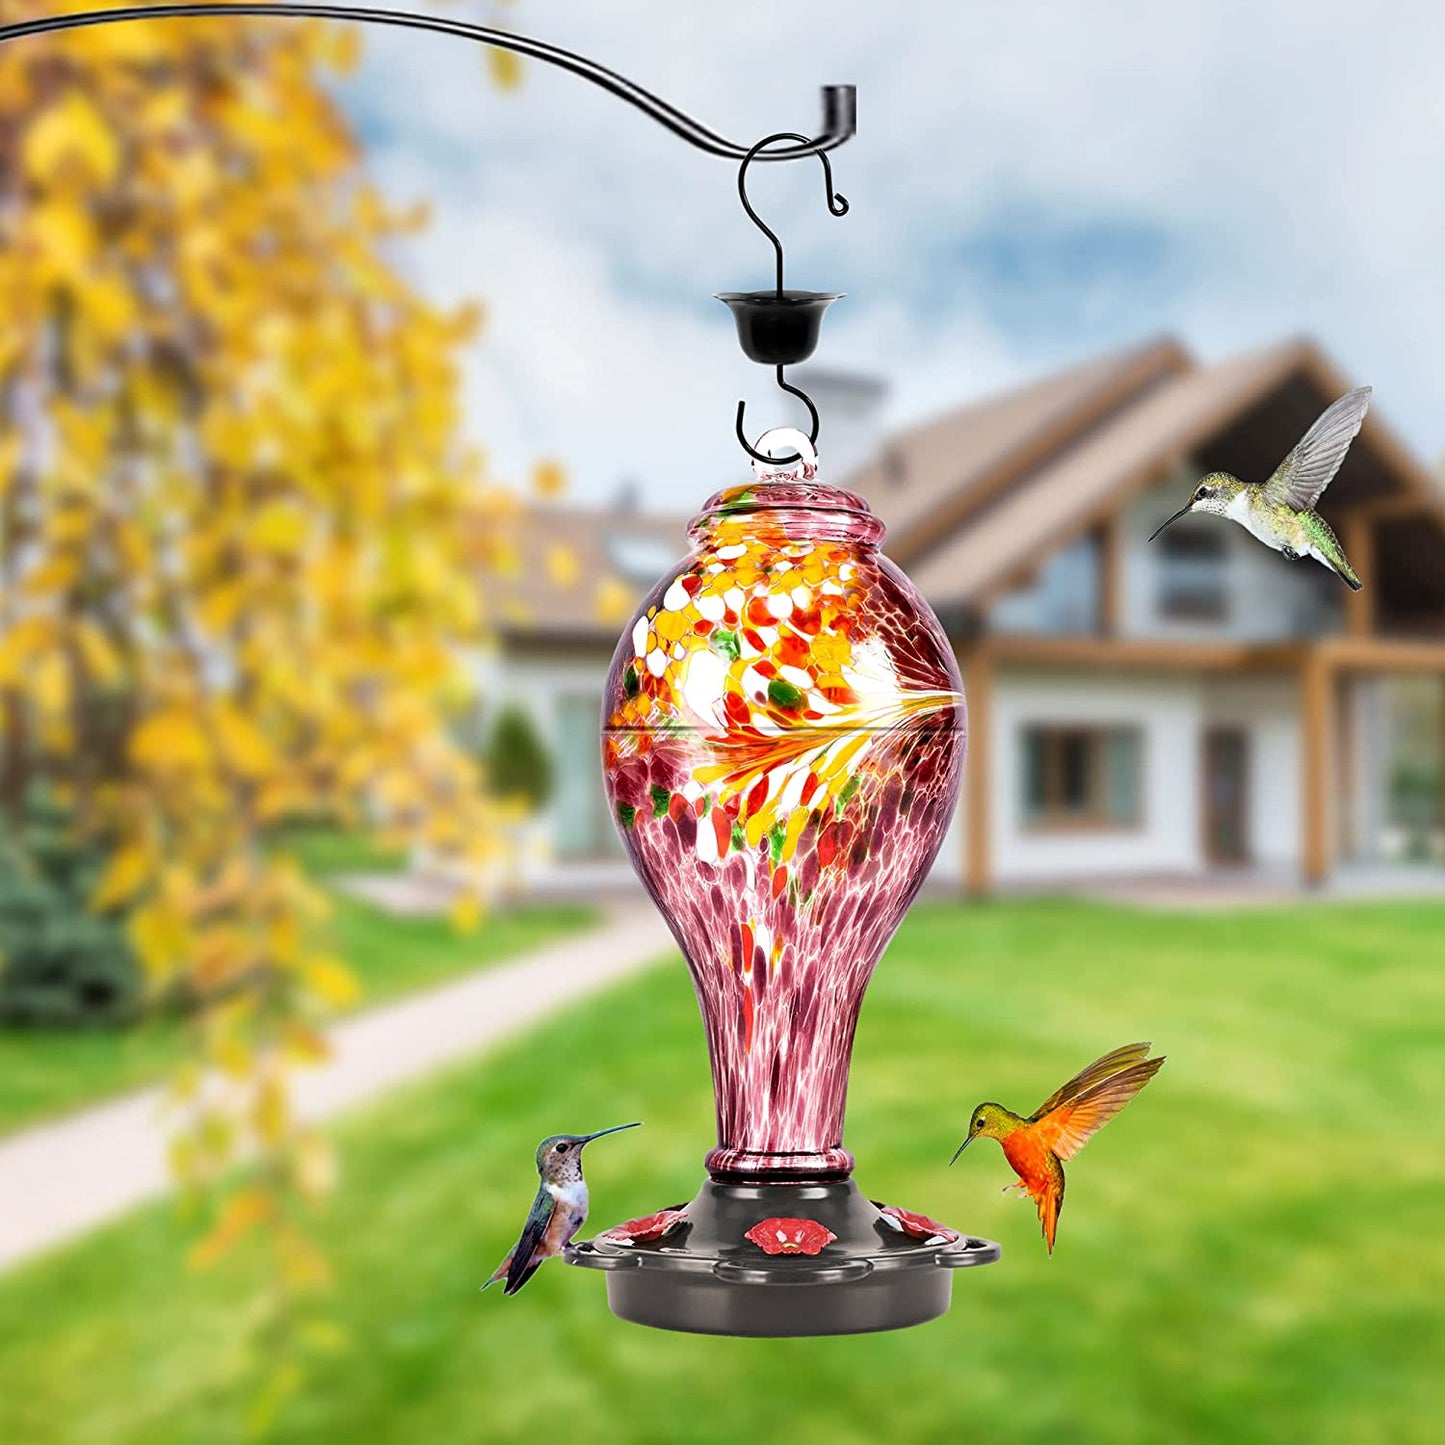 A purple colored hummingbird feeder is hanging up outdoors with 3 hummingbirds flying around it.